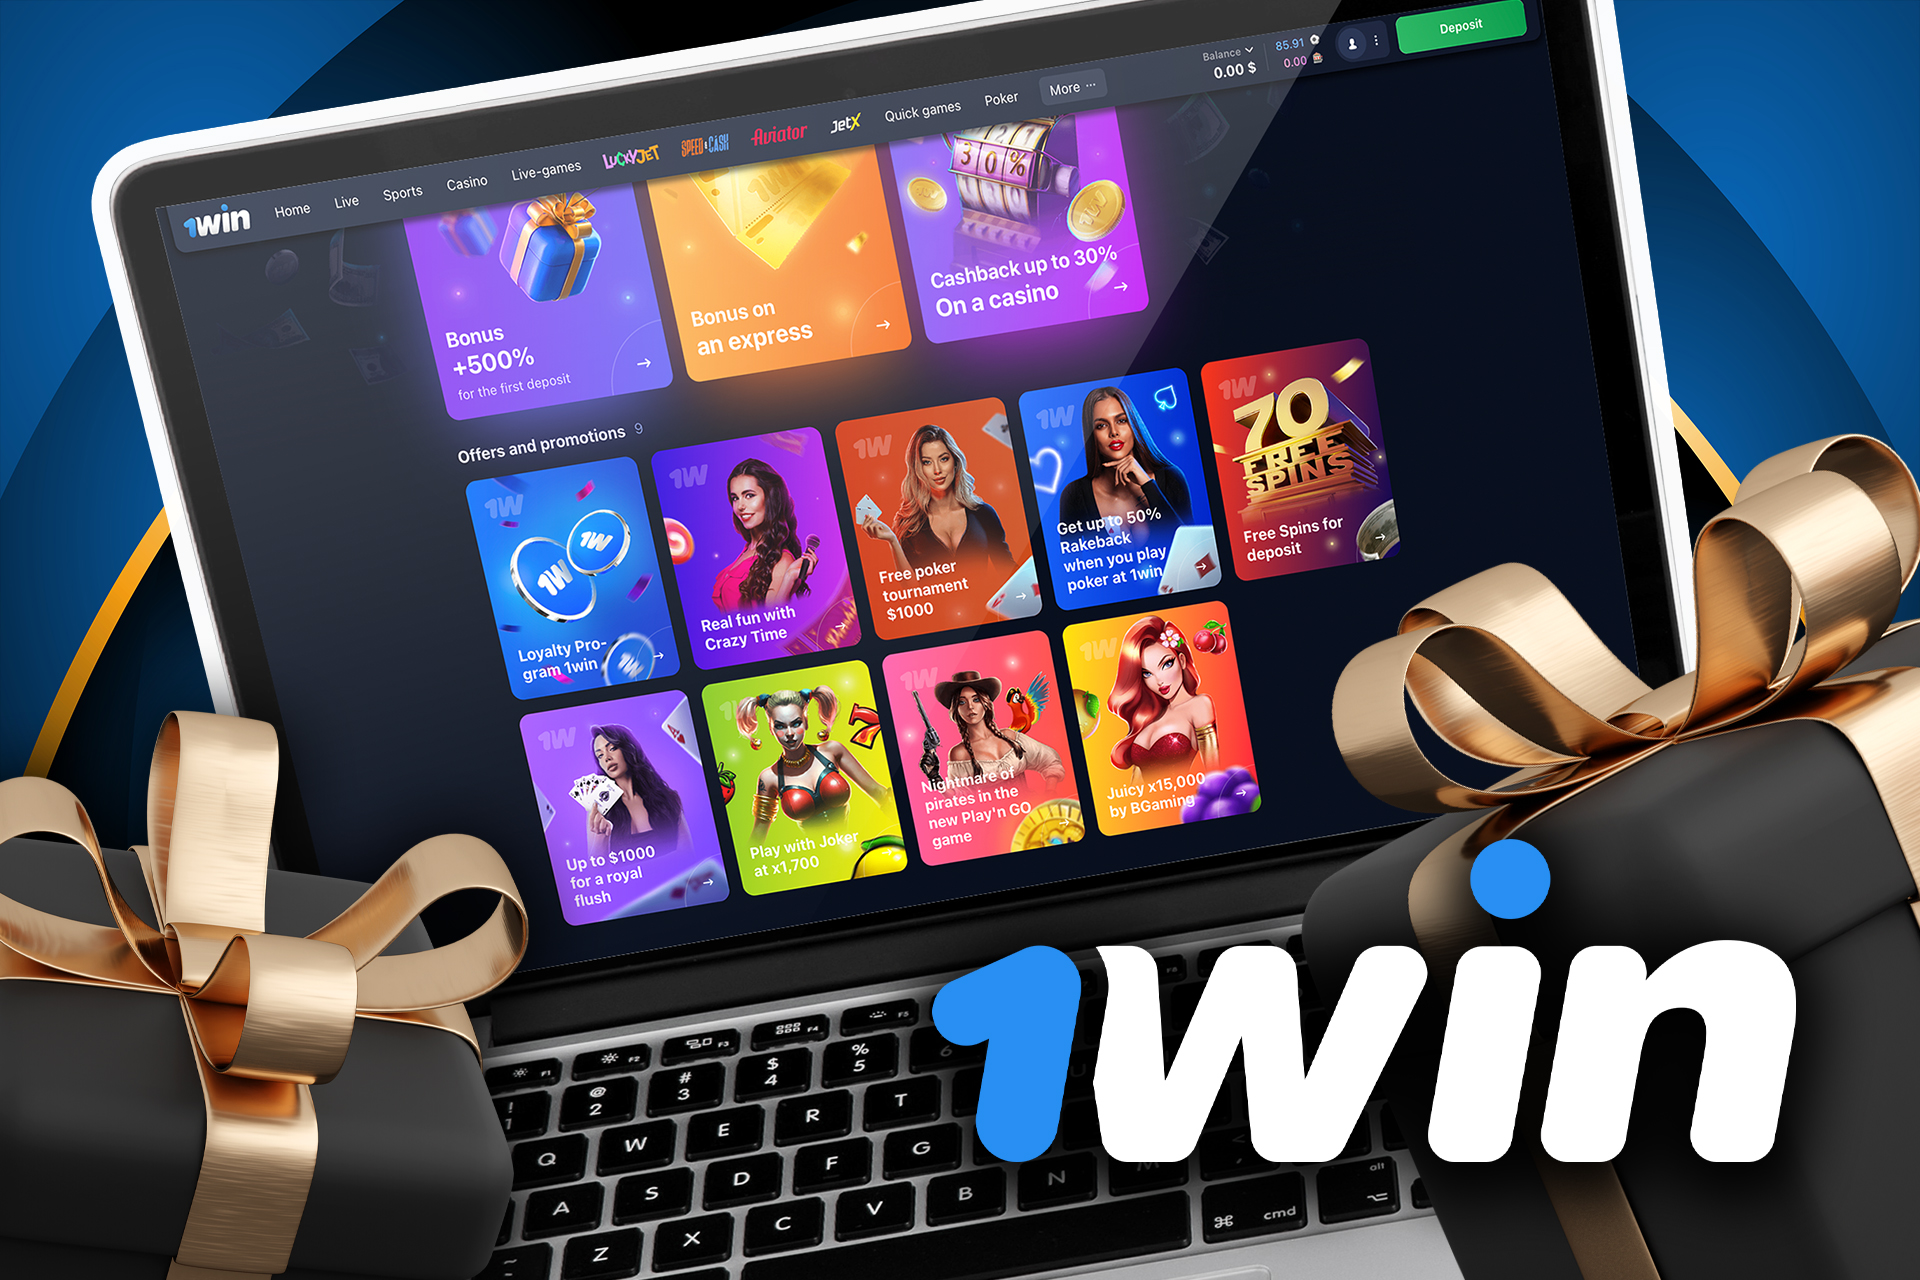 All the 1win players can get another bonuses and promotions on the site or in the app.